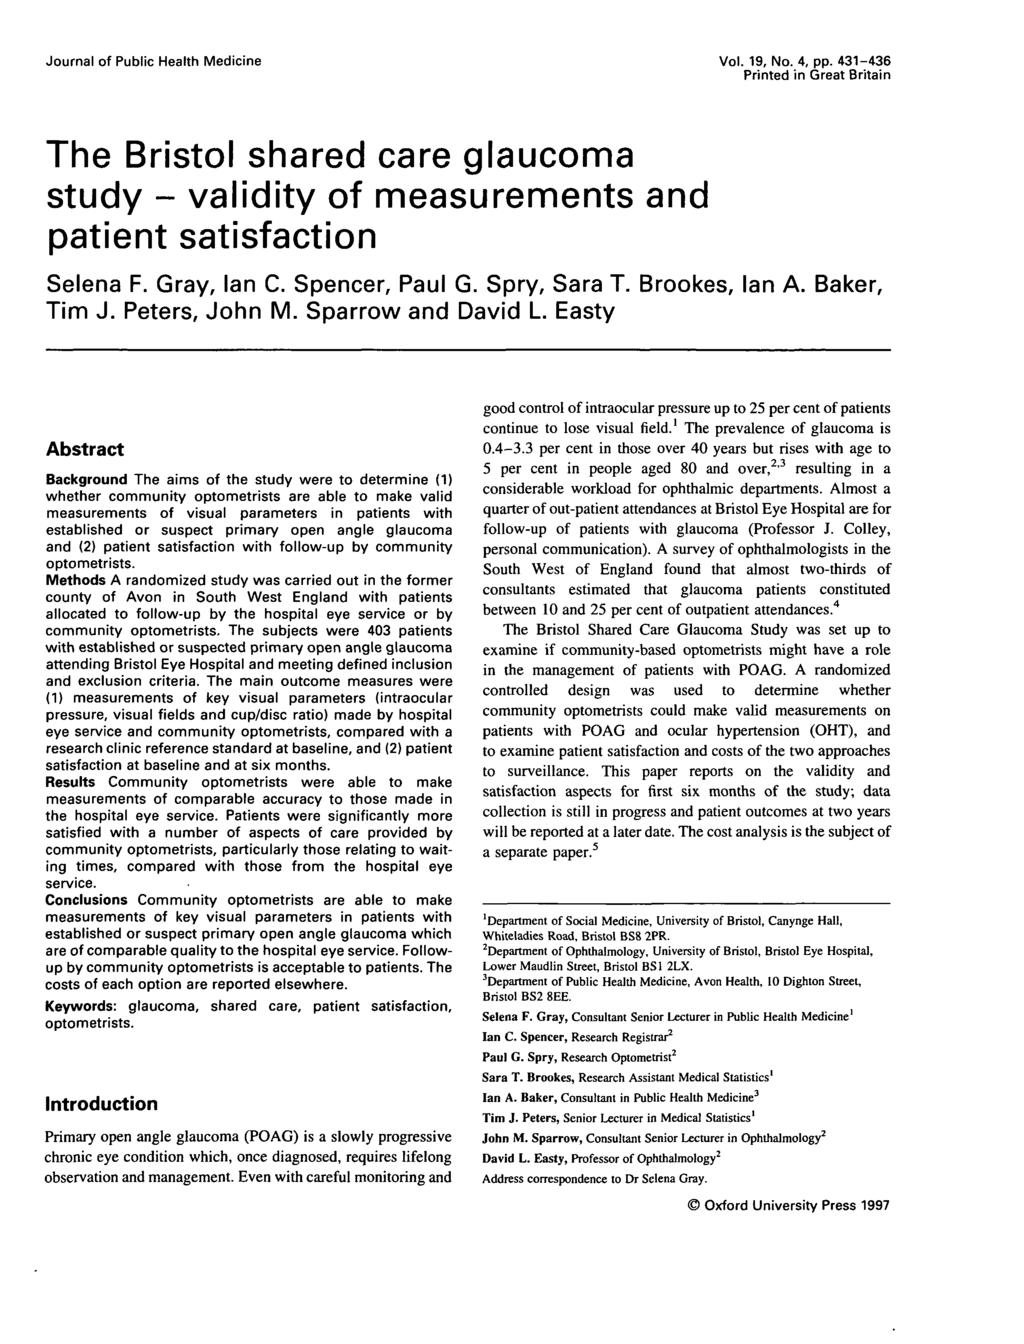 Journal of Public Health Medicine Vol. 19, No. 4, pp. 431-436 Printed in Great Britain The Bristol shared care glaucoma study - validity of measurements and patient satisfaction Selena F. Gray, Ian C.